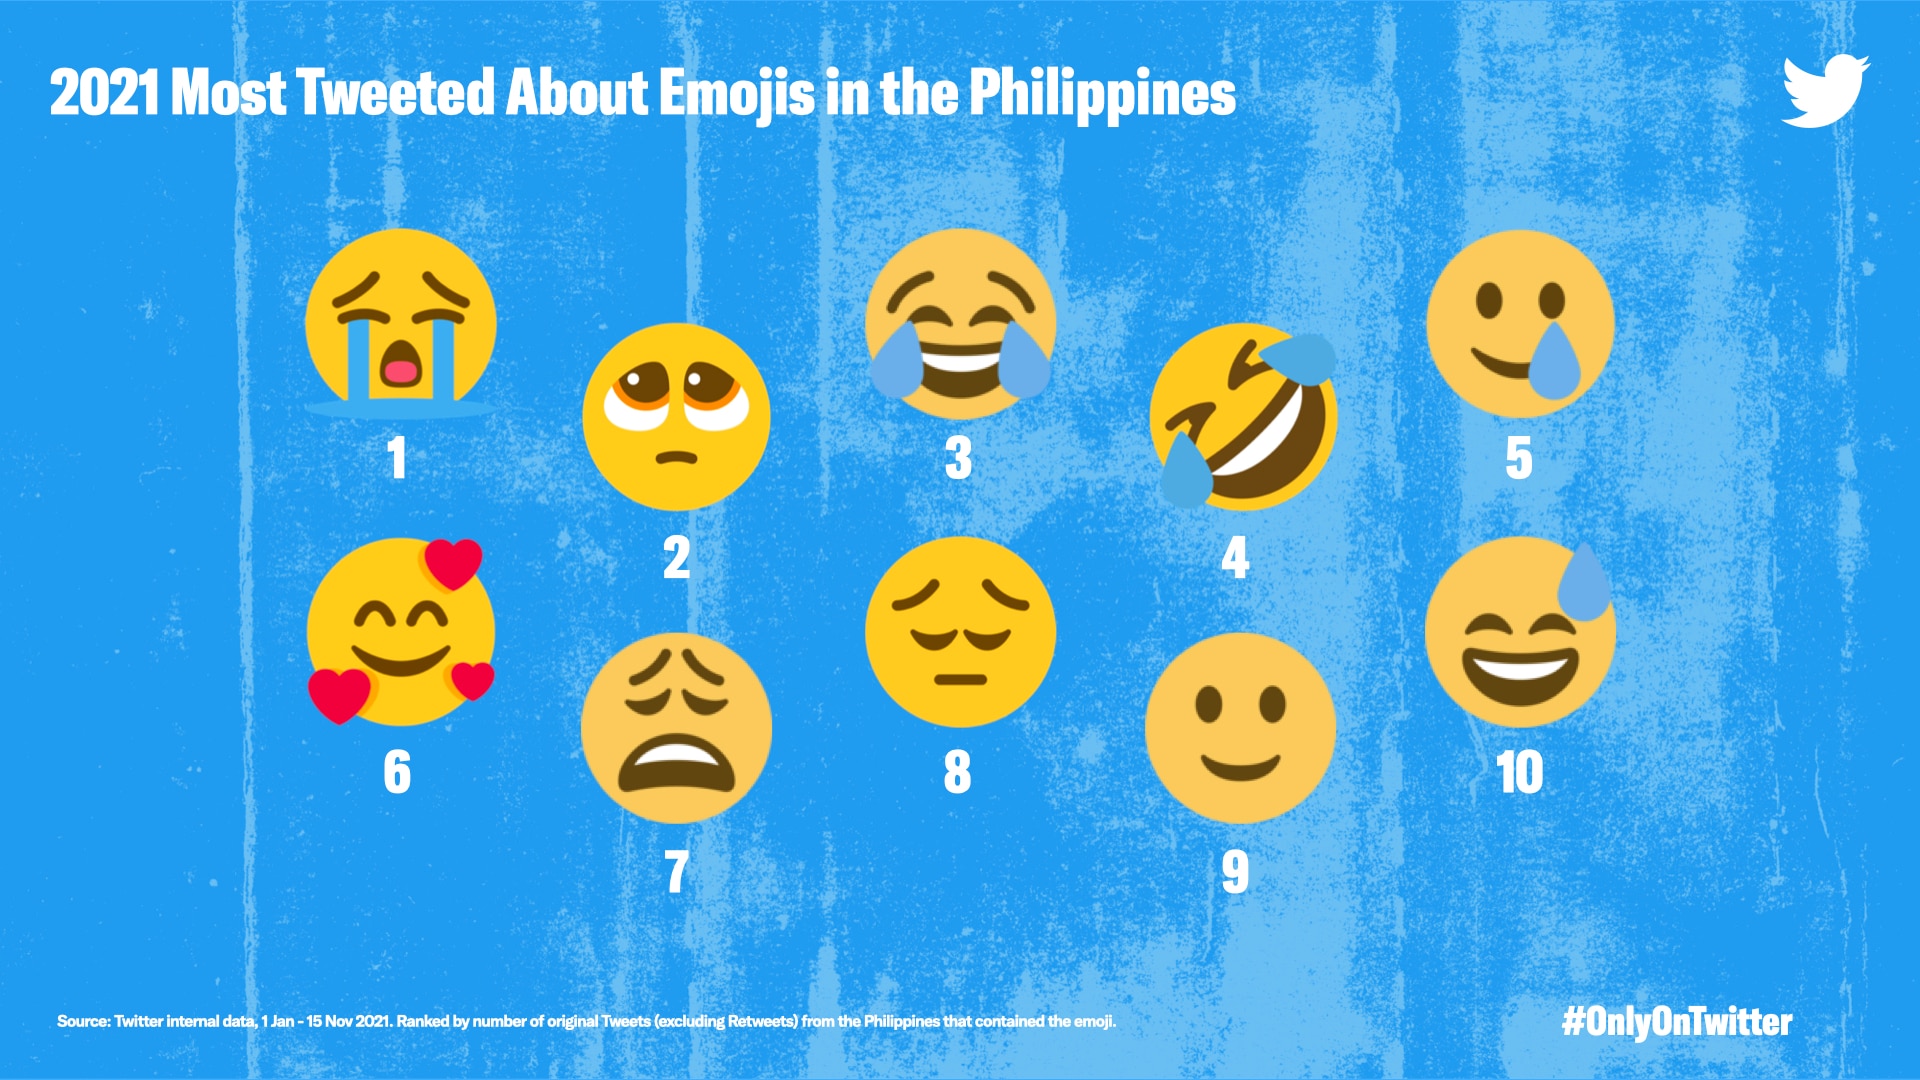 2021 Most Tweeted About Sports Emojis in the Philippines.Handout